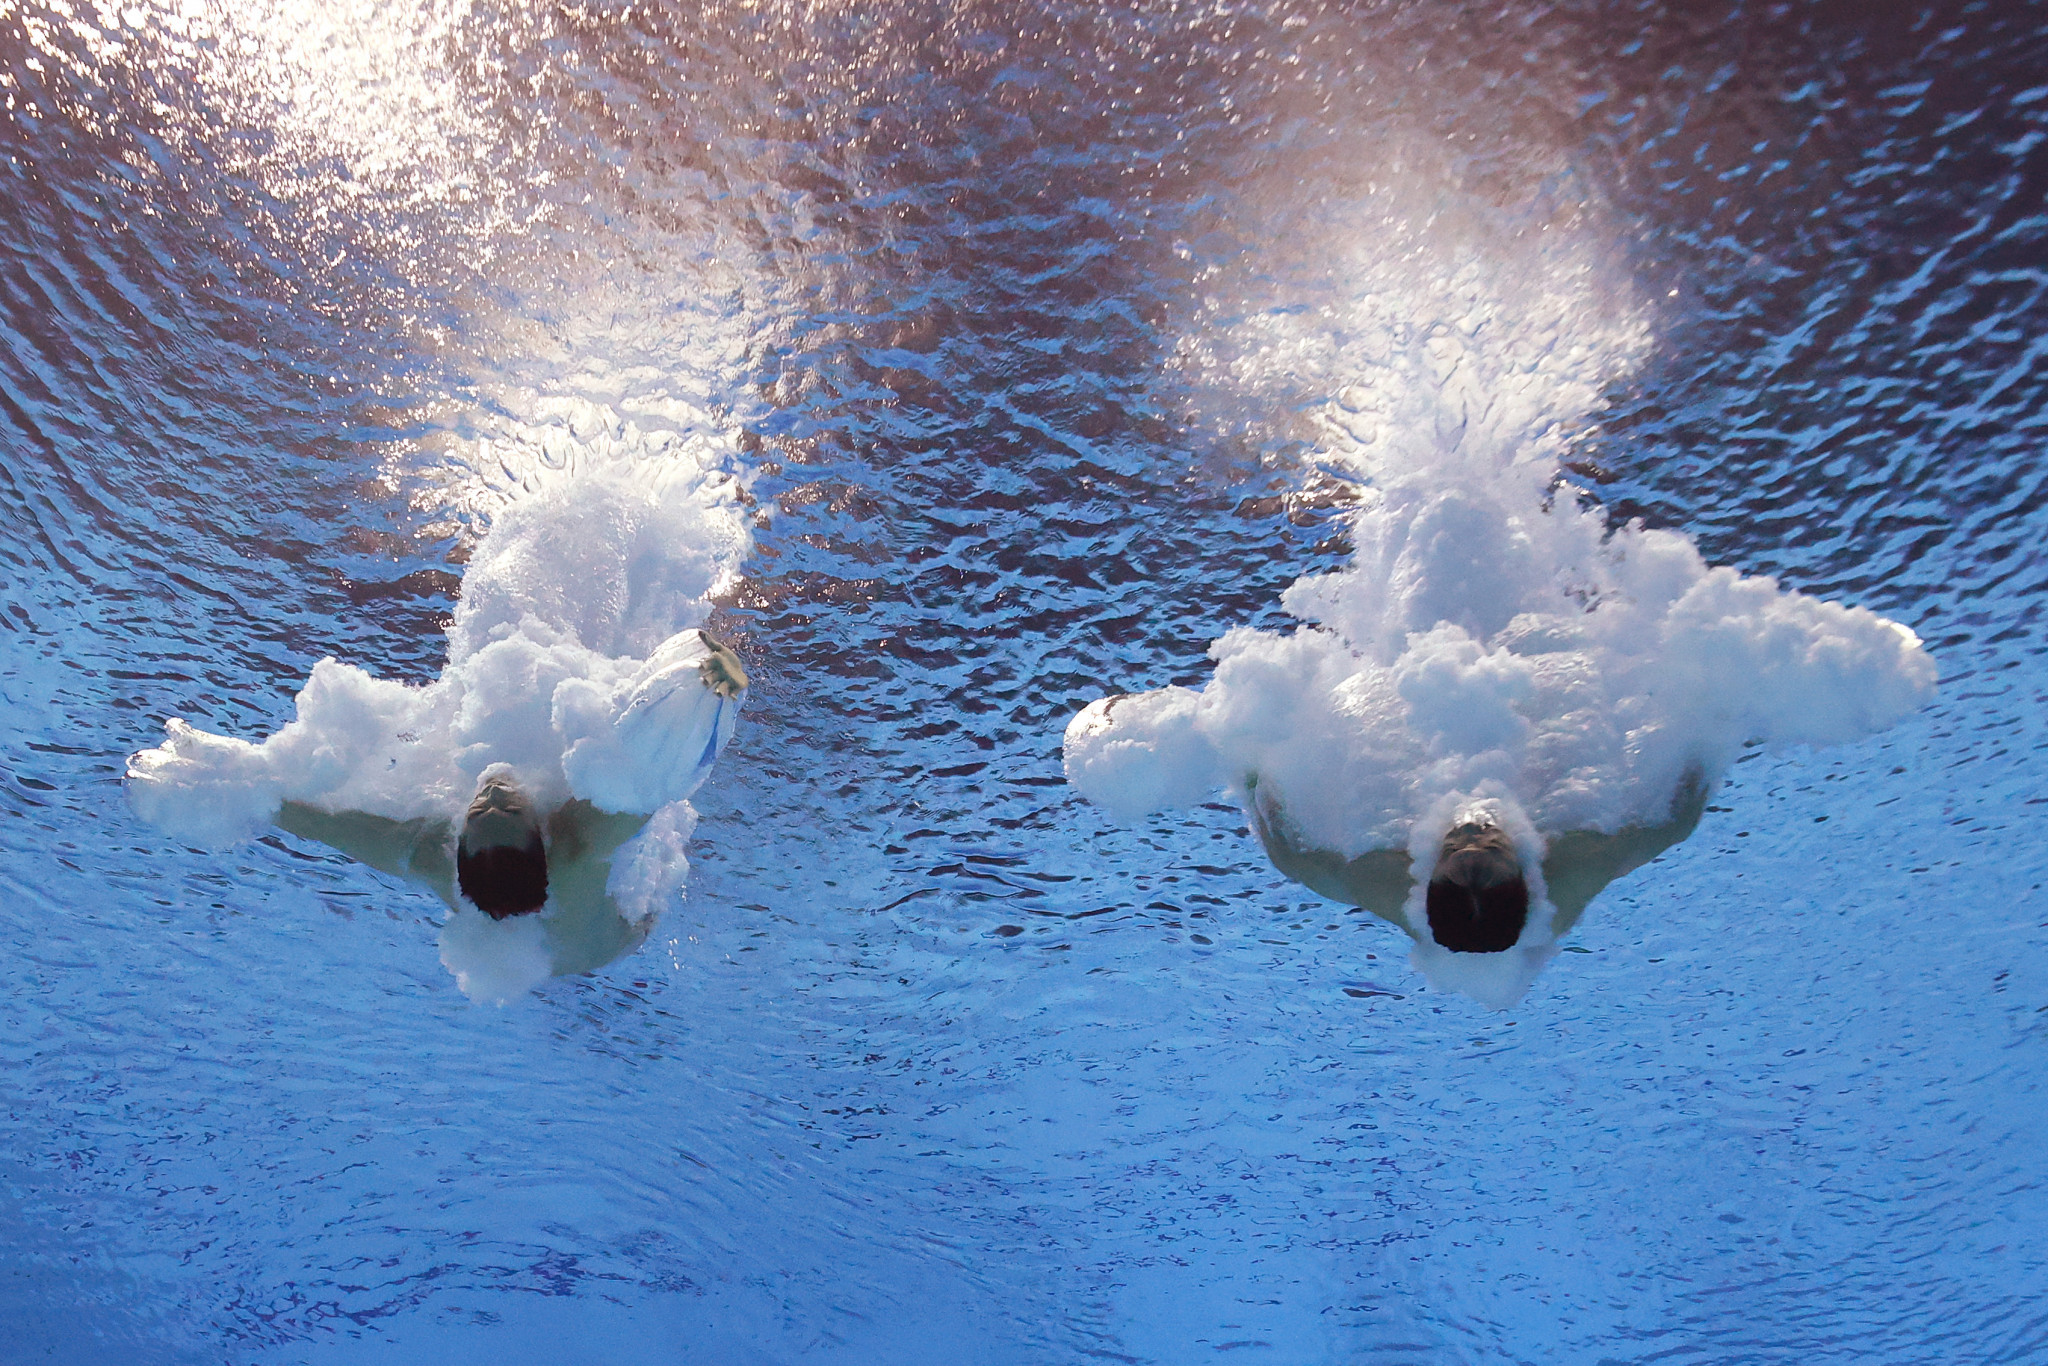 China's Lian Junjie and Yang Hao led the scoring in all six rounds of the men's 10m synchronised diving final ©Getty Images